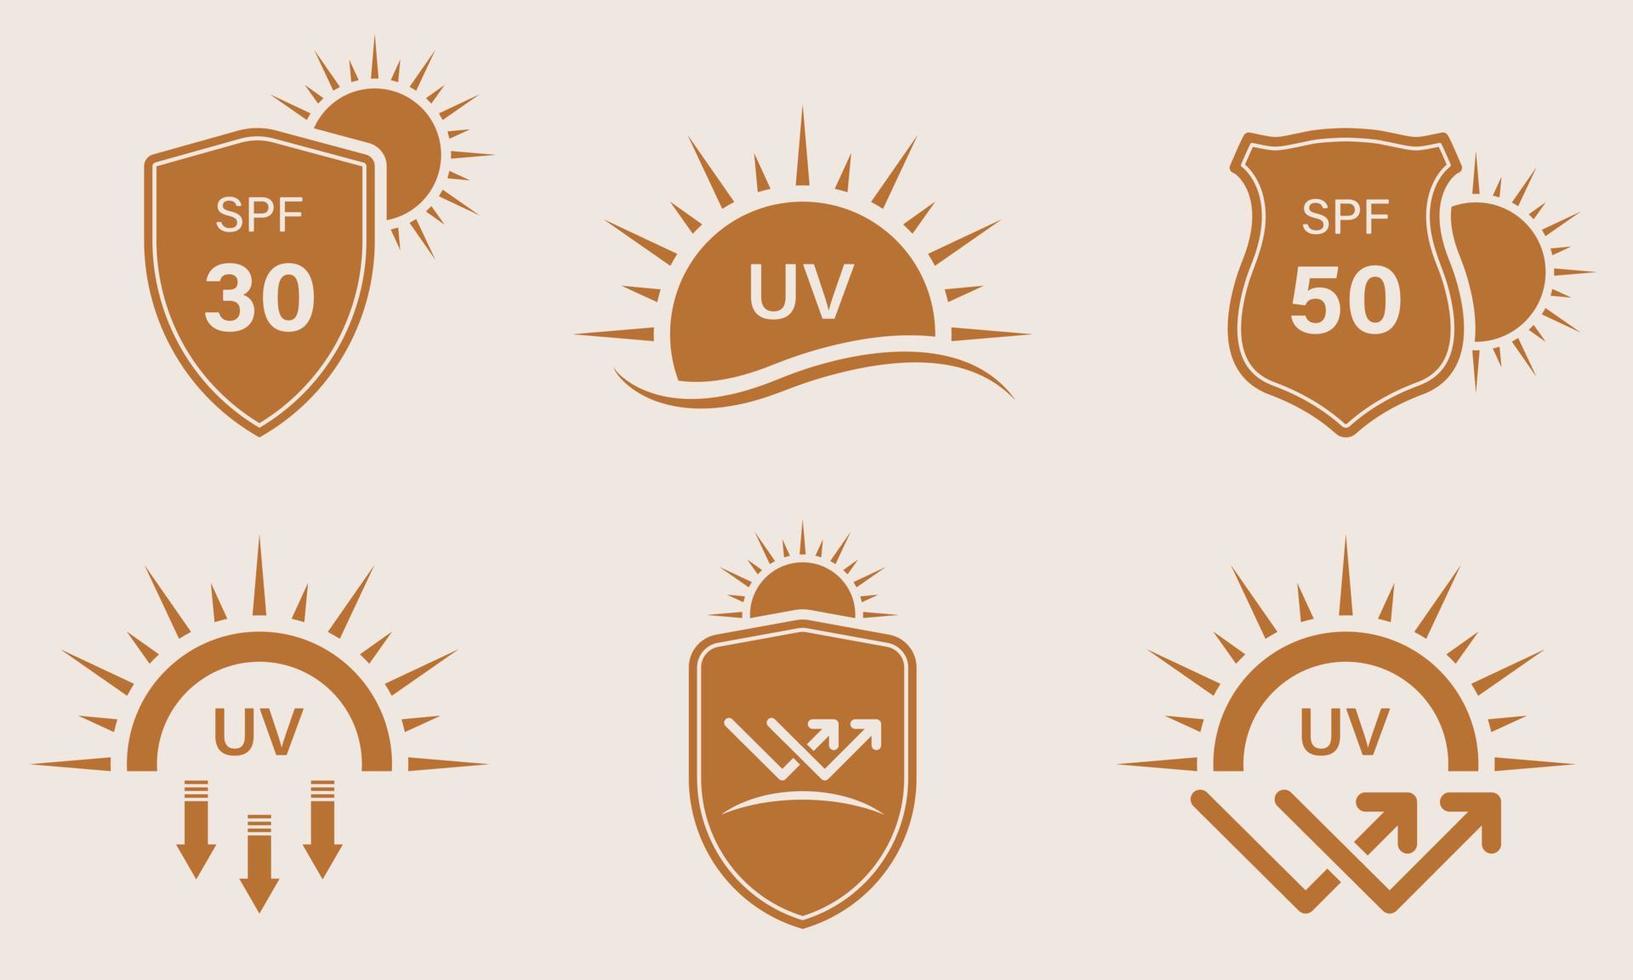 Ultraviolet Protect Silhouette Icon Set. SPF 50 30 Resistant Sunblock Glyph Pictogram. Shield Protection UV Radiation Rays Skin Care Icon. Solar Protection Arrows Sign. Isolated Vector Illustration.